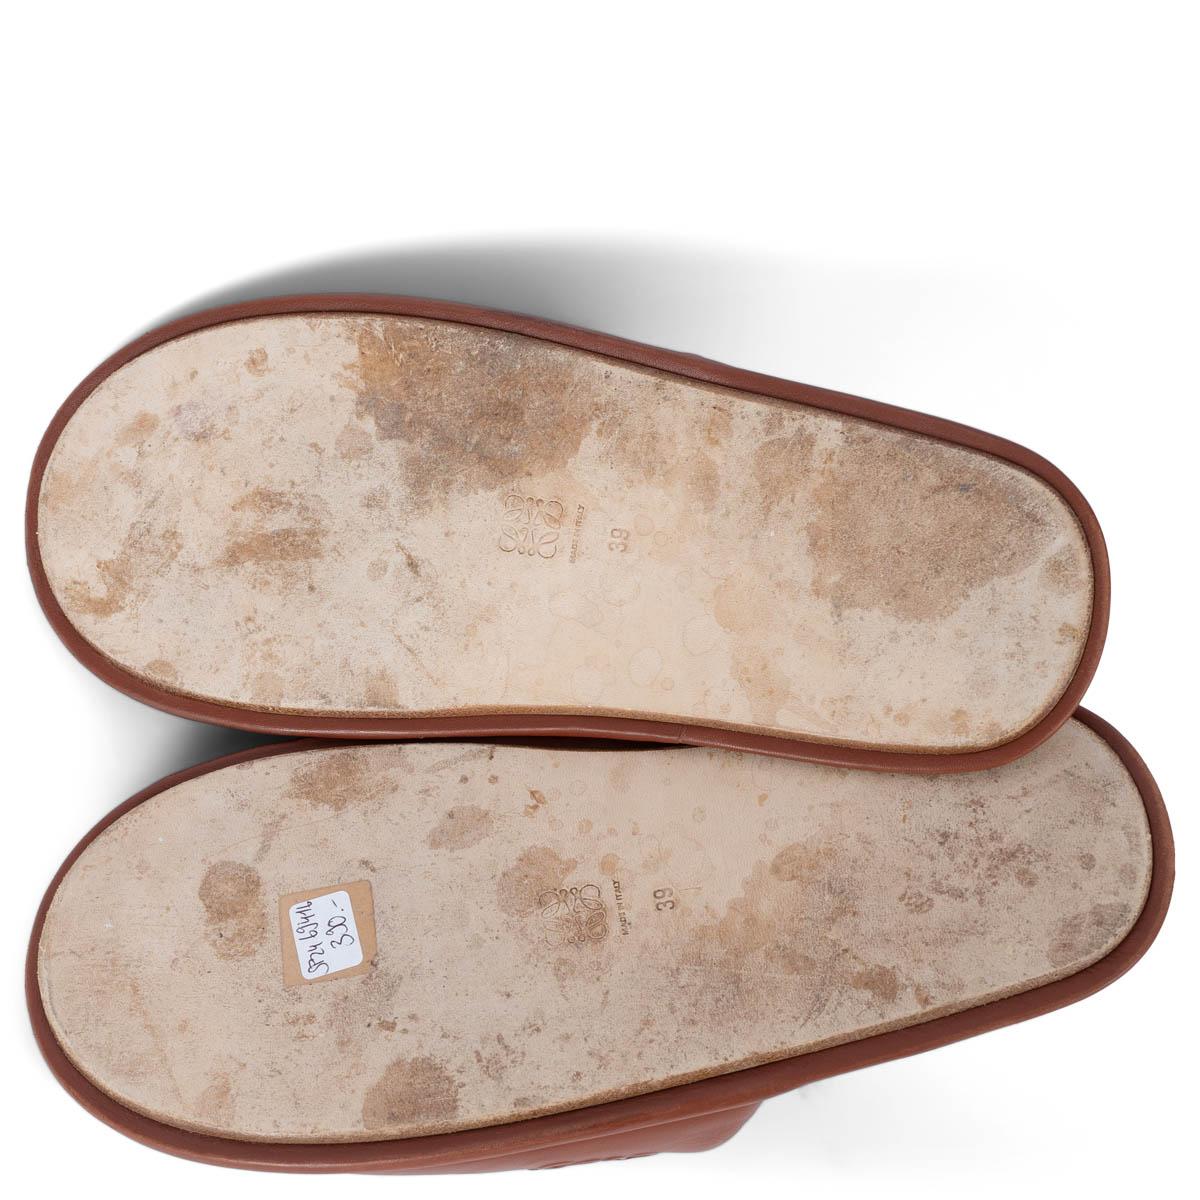 LOEWE cognac leather LOGO EMBOSSED SLIPPERS Flats Shoes 39 fit 38.5 For Sale 2